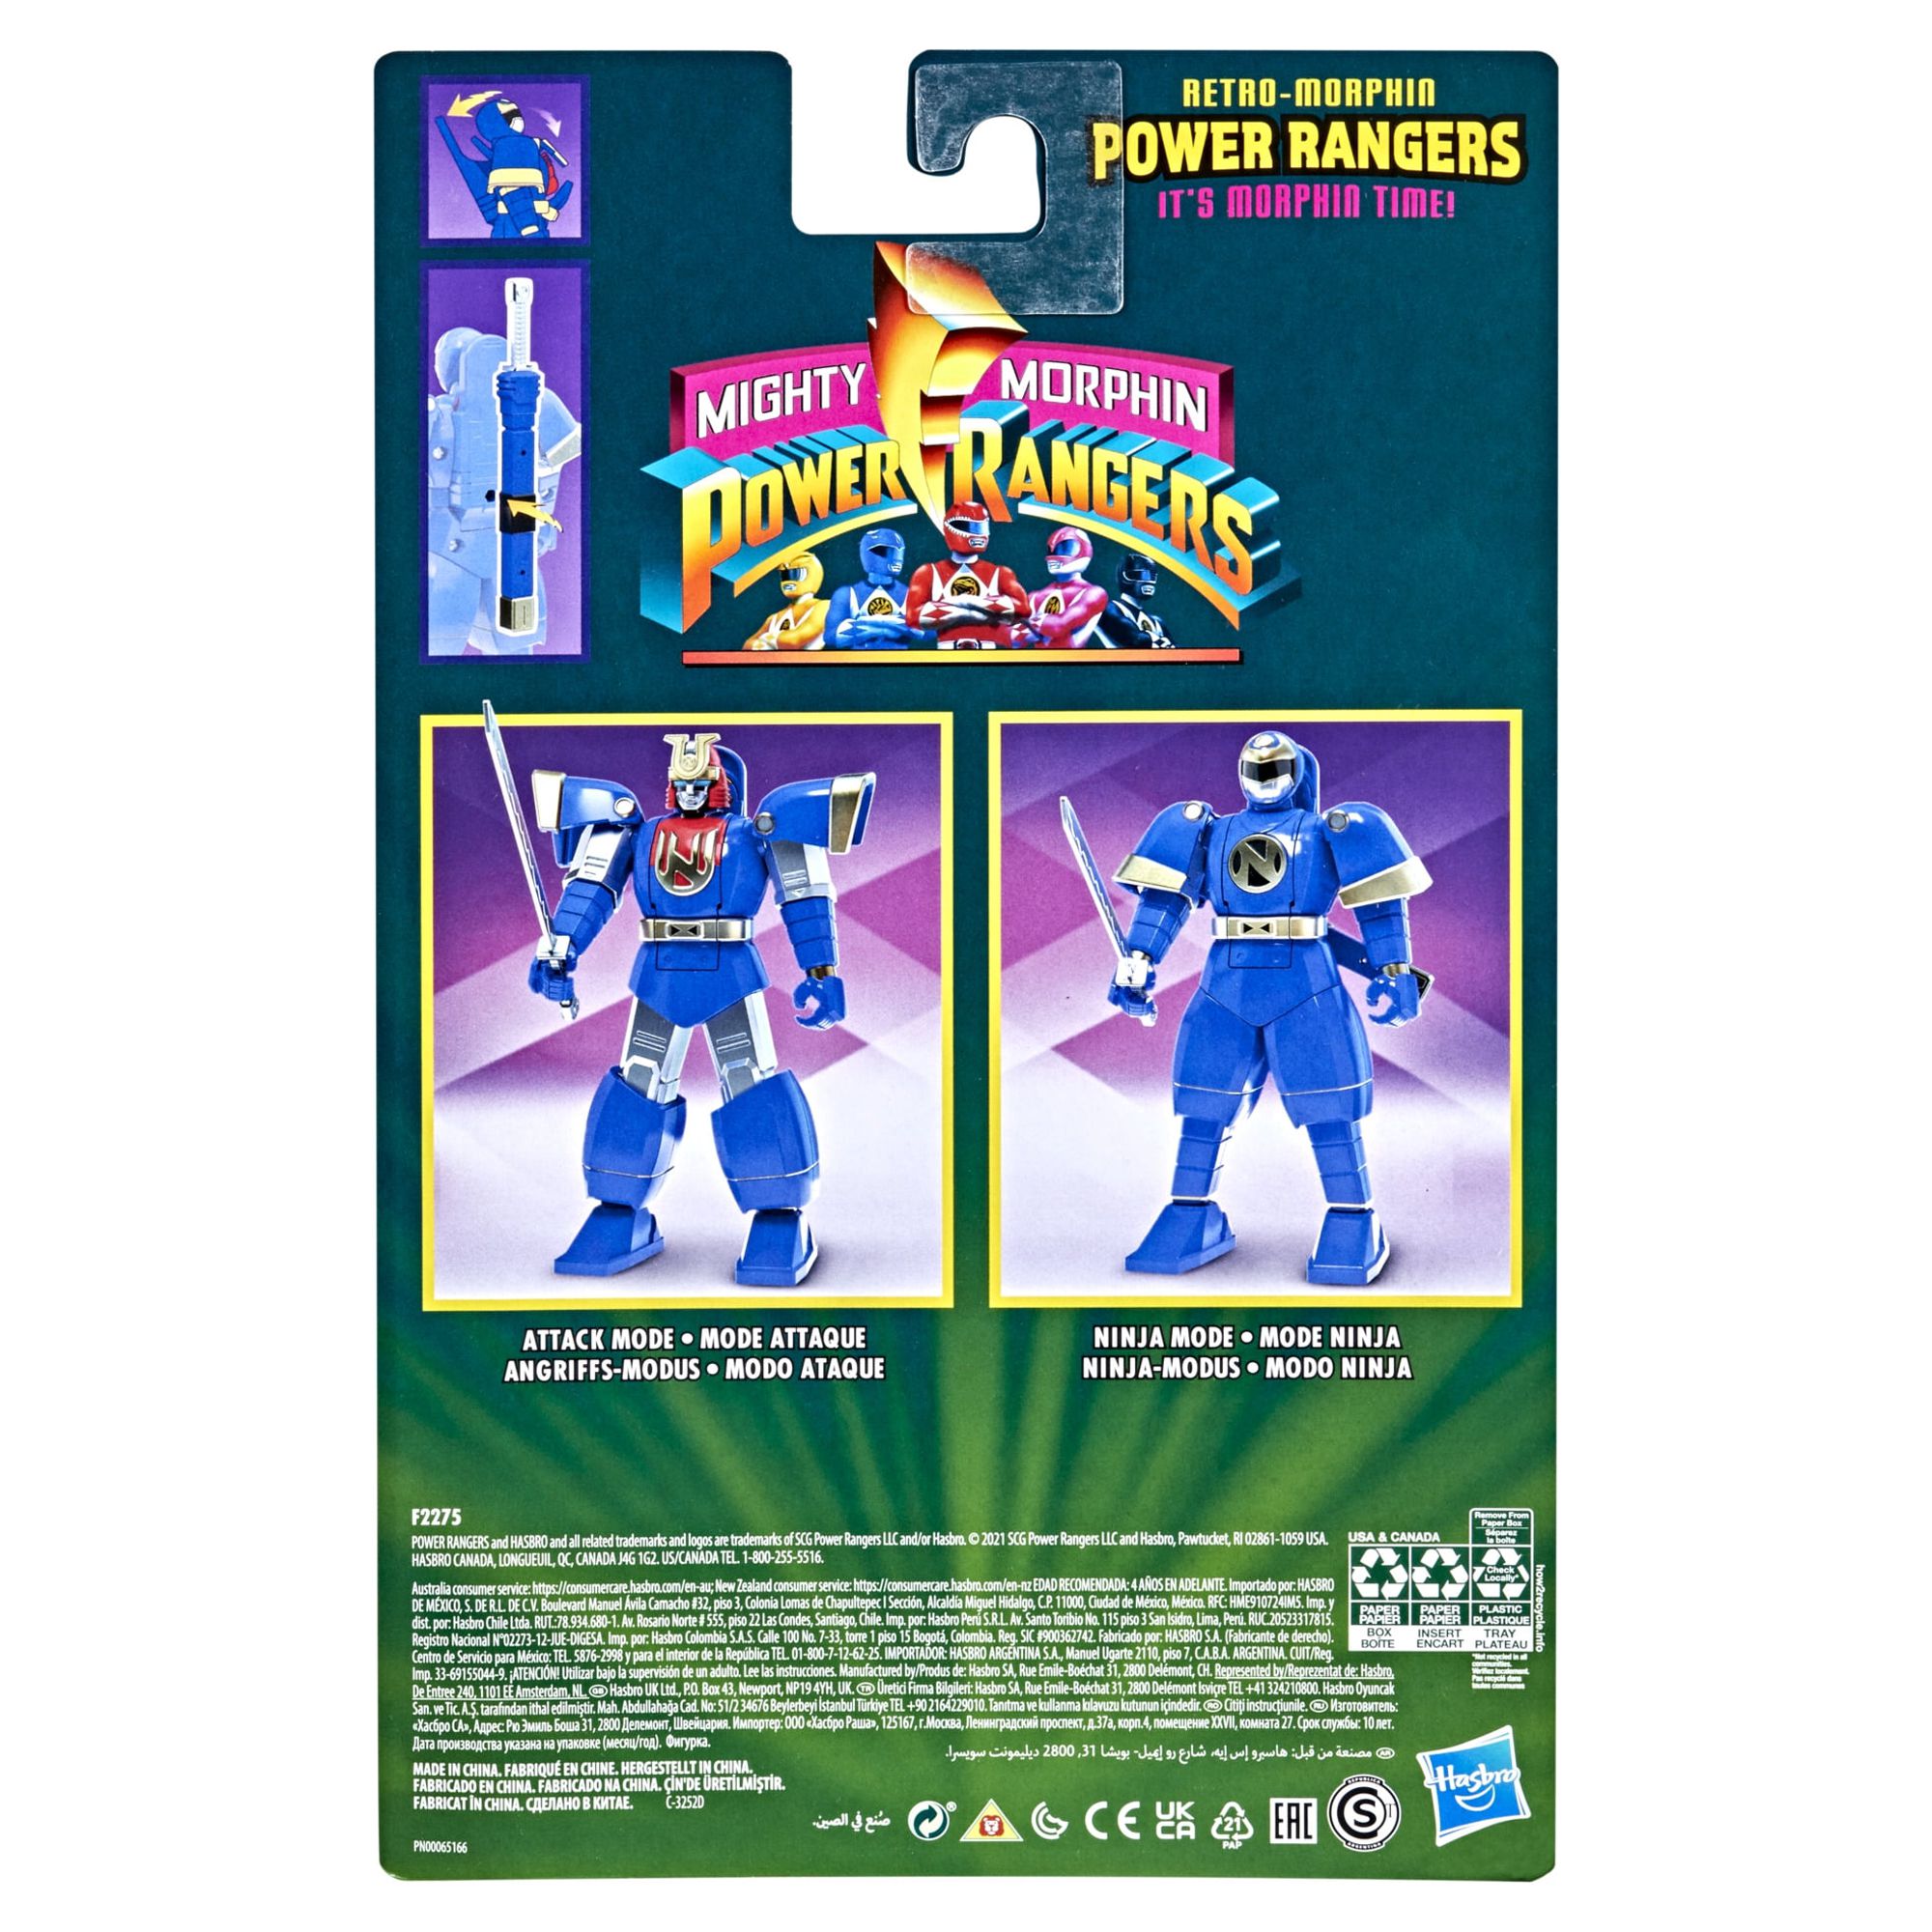 Power Rangers: Mighty Morphin Retro-Morphin Ninjor Toy Action Figure for Boys and Girls Ages 4 5 6 7 8 and Up (6”) - image 4 of 4